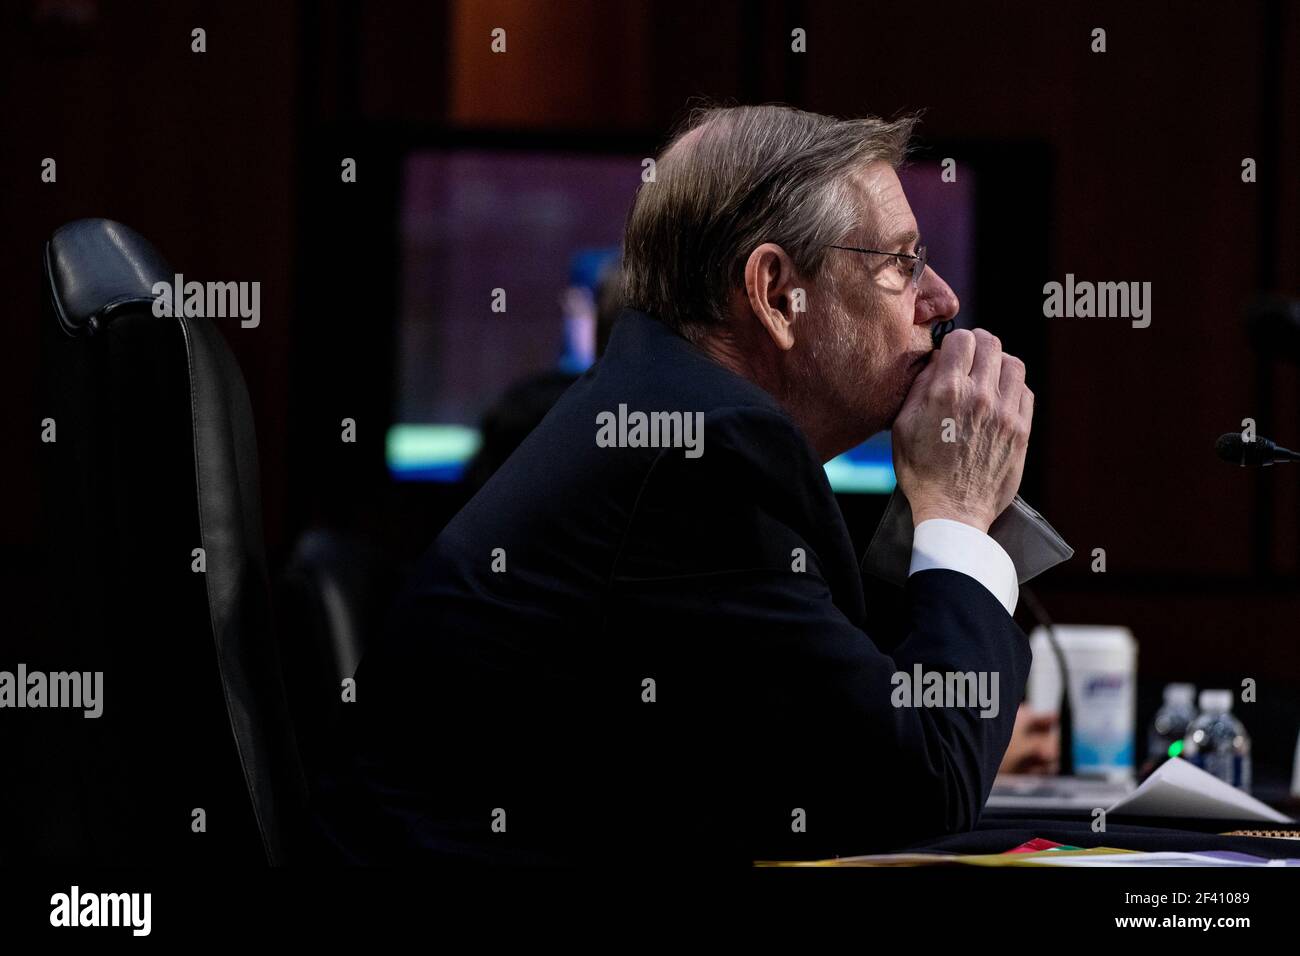 Washington, United States. 18th Mar, 2021. Dr. David Kessler, Chief Science Officer of the White House COVID-19 Response Team, listens during a hearing with the Senate Committee on Health, Education, Labor, and Pensions, on the Covid-19 response, on Capitol Hill in Washington March 18th, 2021. Pool Photo by Anna Moneymaker/UPI Credit: UPI/Alamy Live News Stock Photo